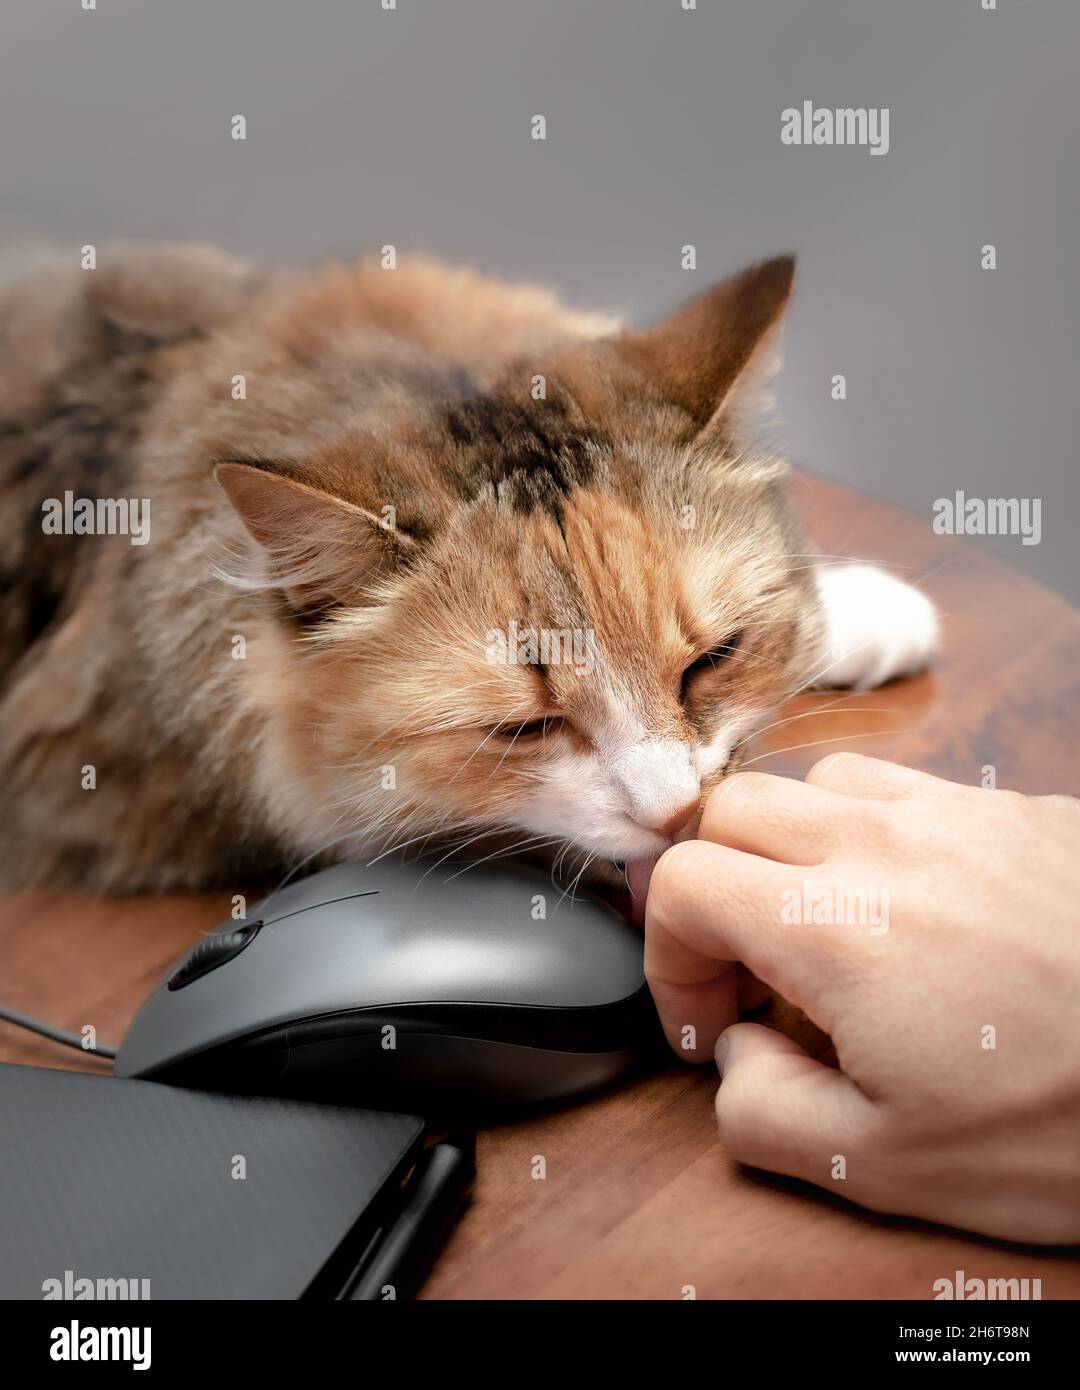 Close up of cat licking human hand while working on laptop. Cute fluffy cat showing affection and social bond or friendship with the pet owner, while Stock Photo